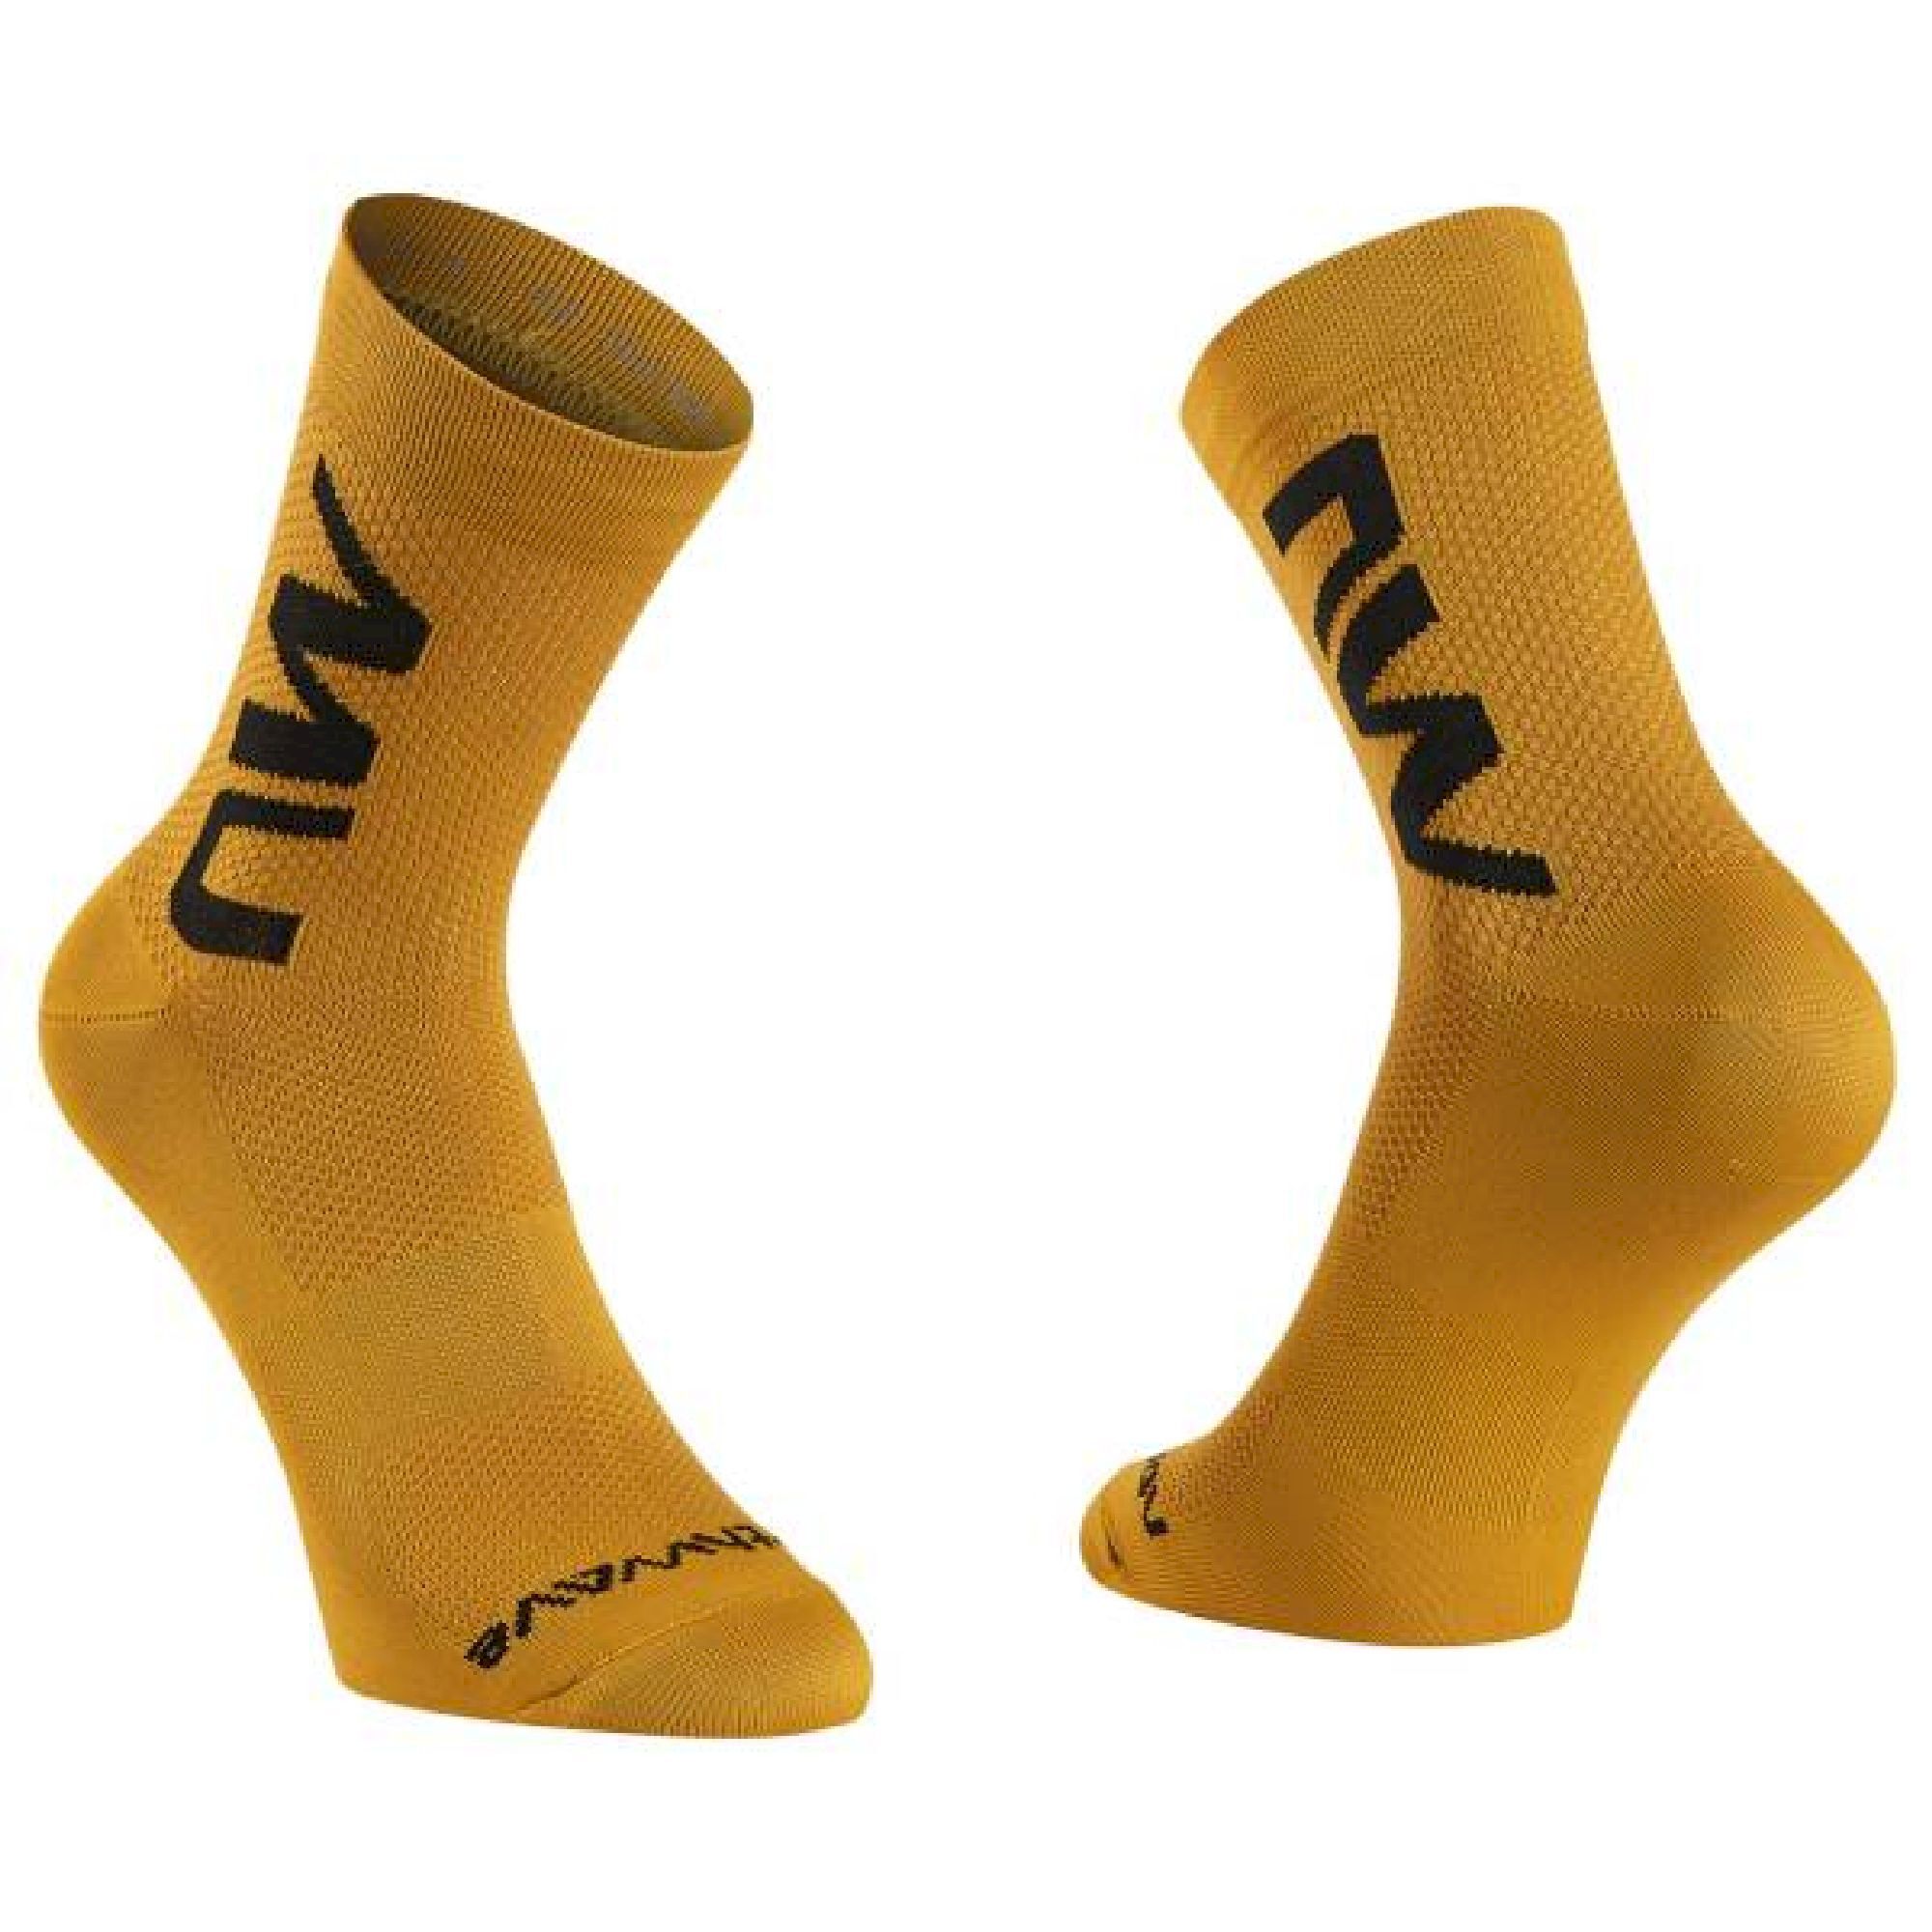 Northwave Extreme Air Mid Sock - Chaussettes vélo | Hardloop